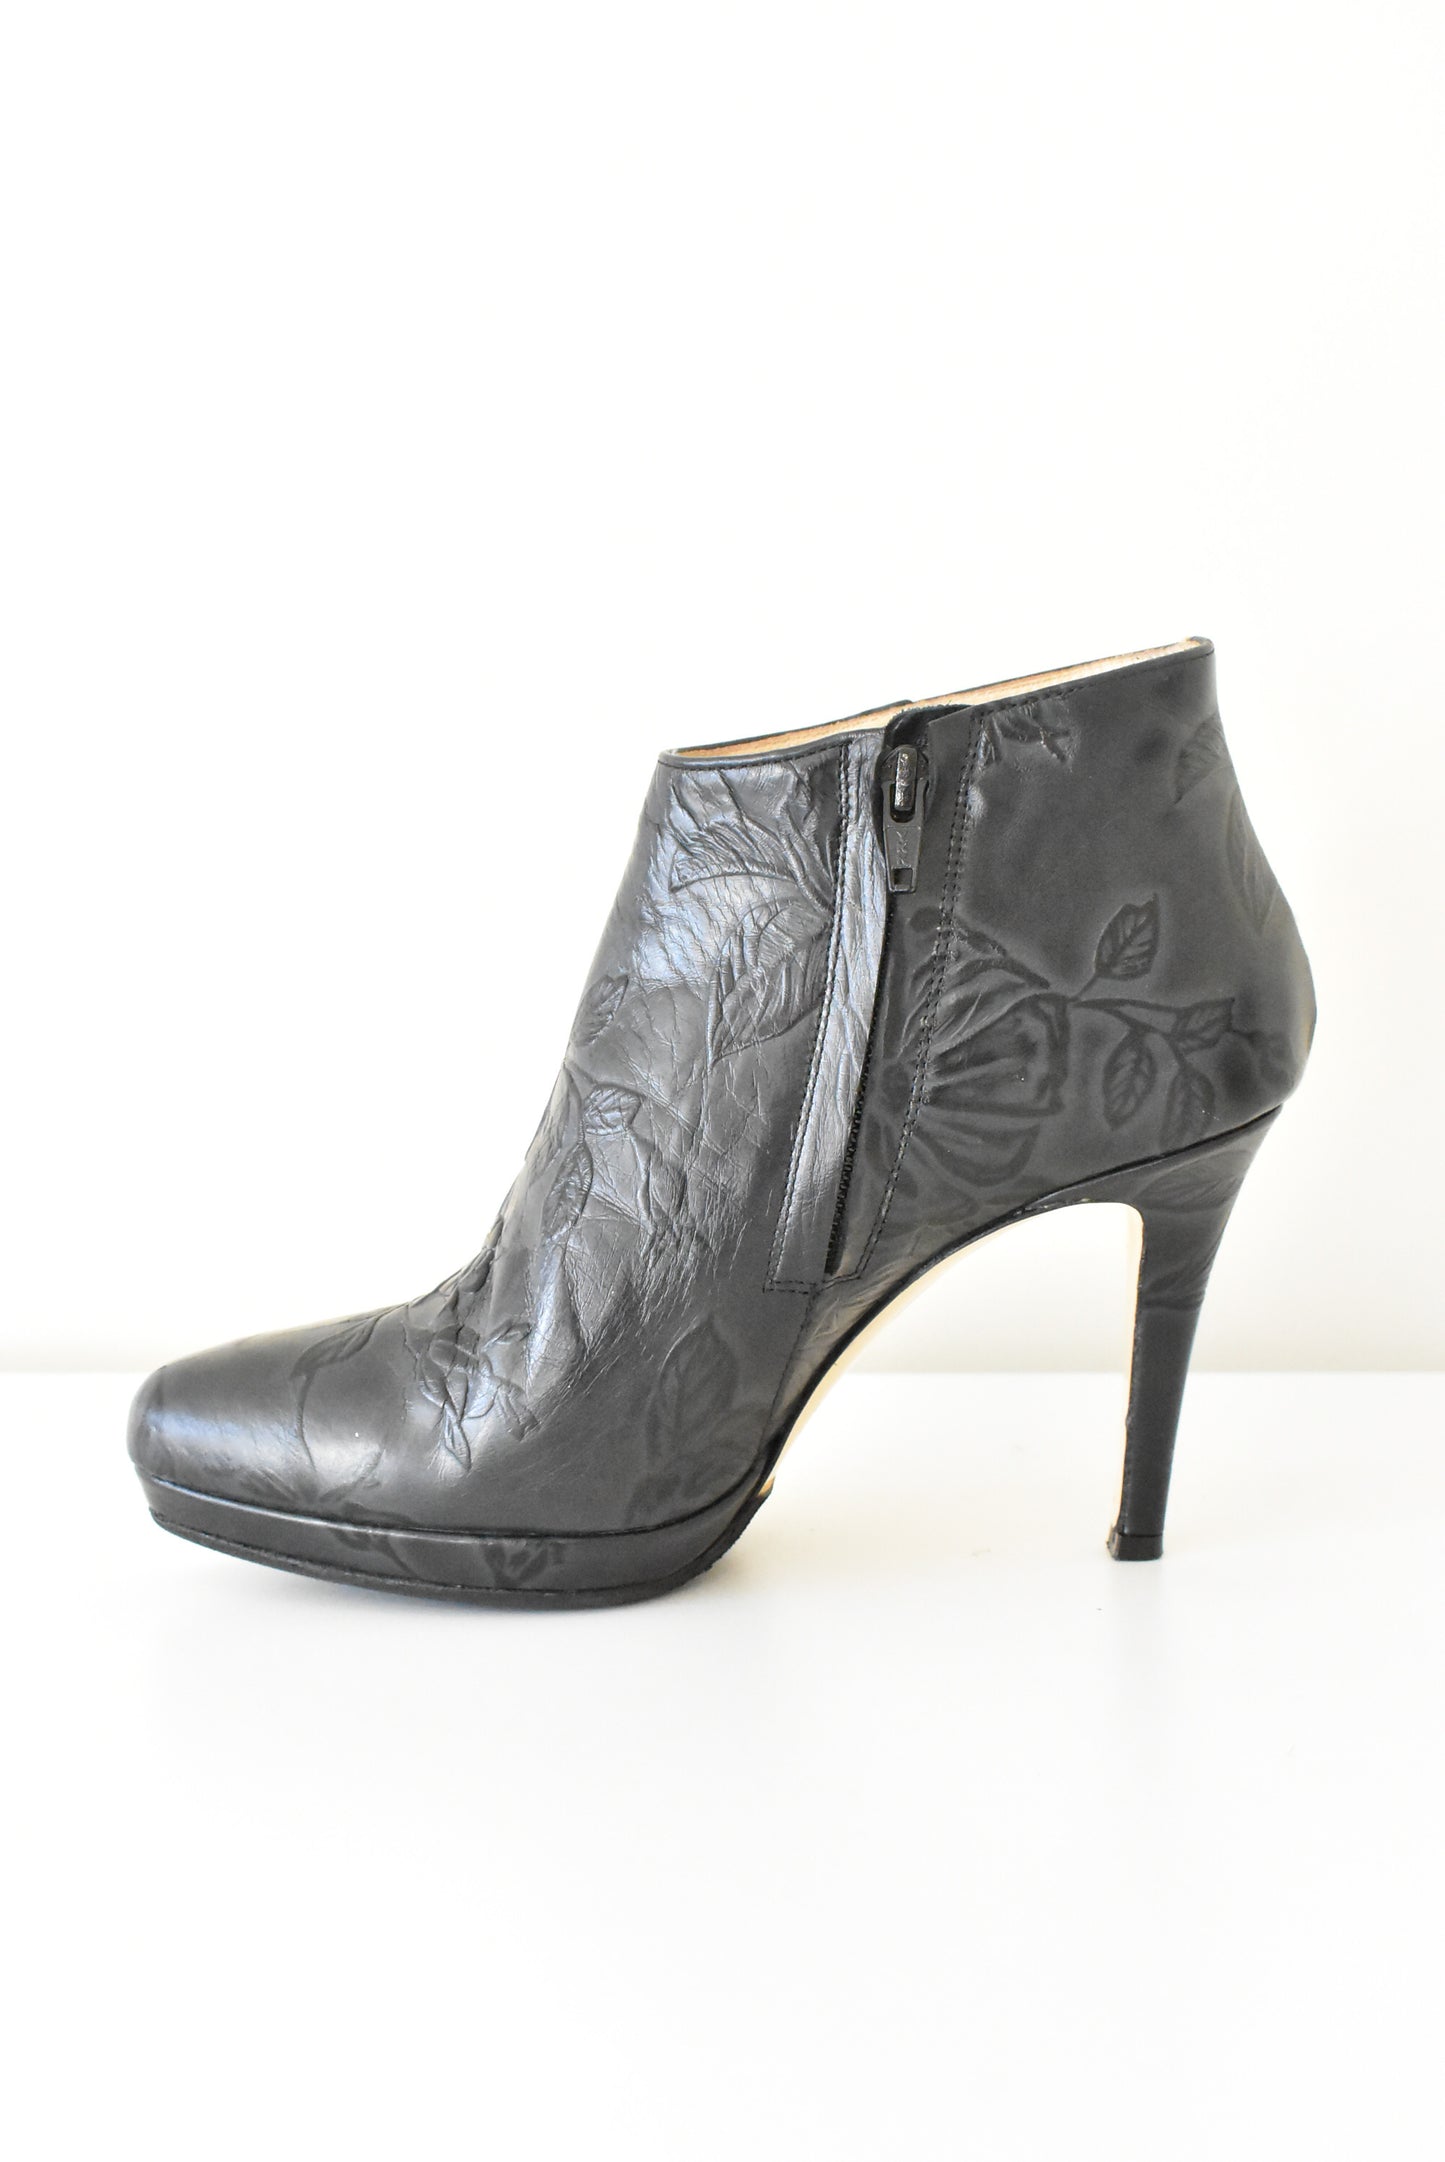 Cuoieria Fiorentina heeled ankle boots, size 38